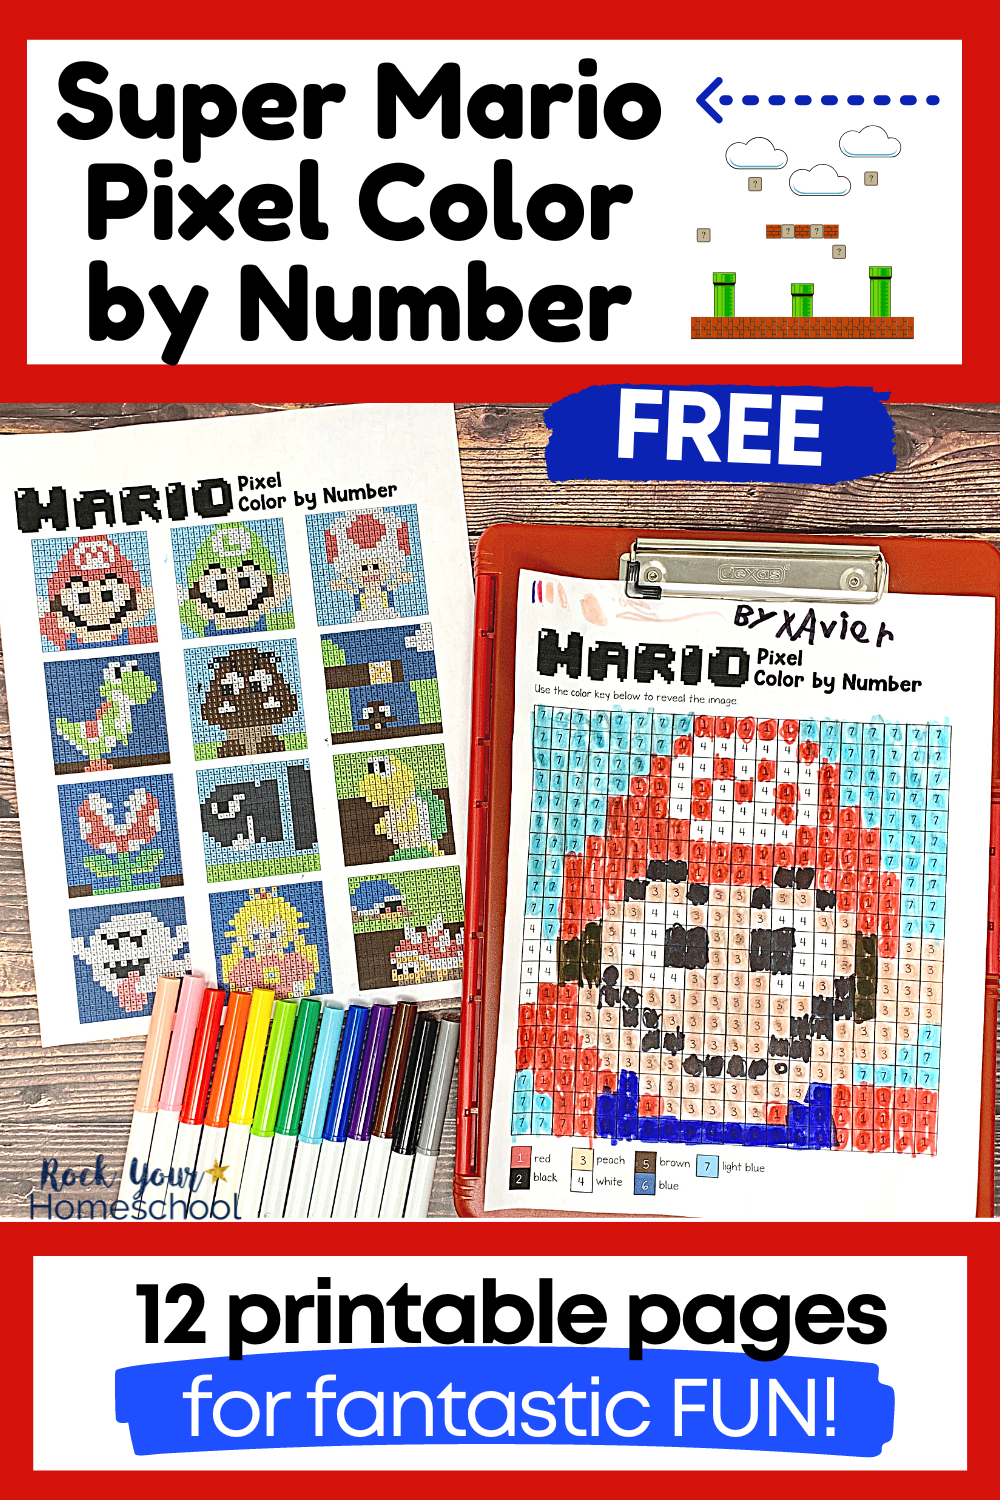 Super Mario Pixel Coloring Pages for Extra Special Fun (12 Free)